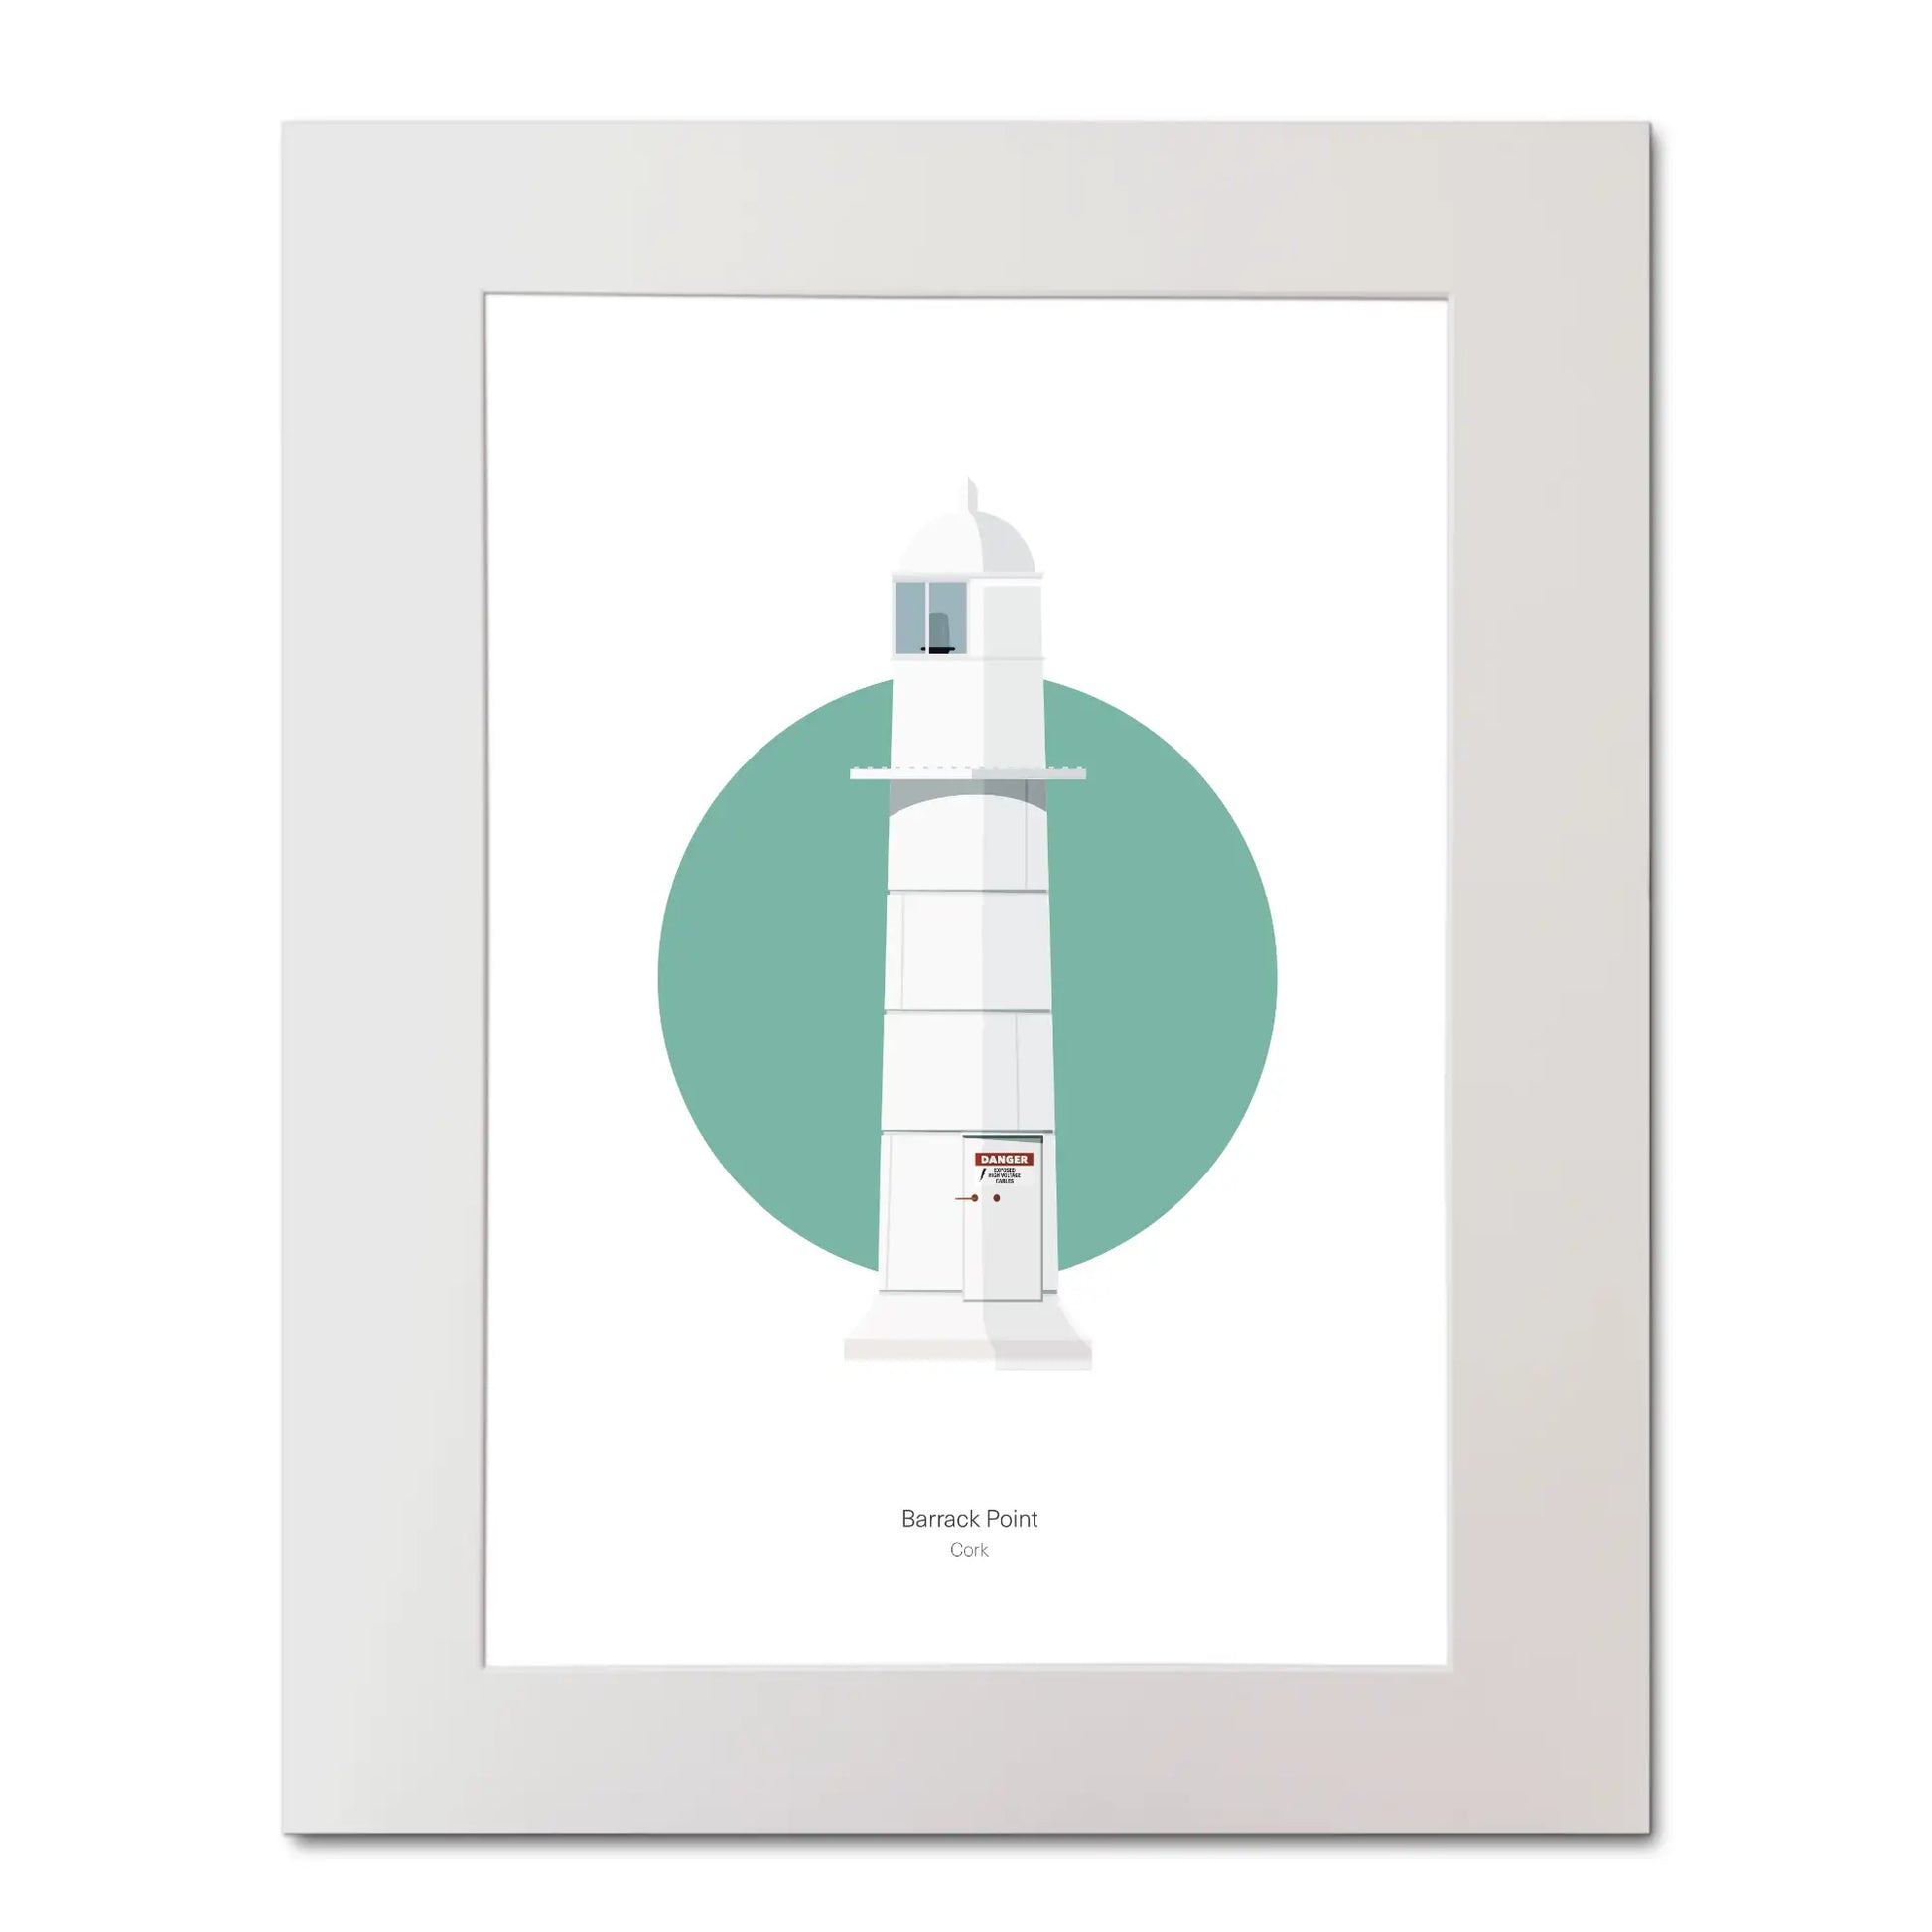 Contemporary illustration of Barrack Point lighthouse on a white background inside light blue square, mounted and measuring 40x50cm.